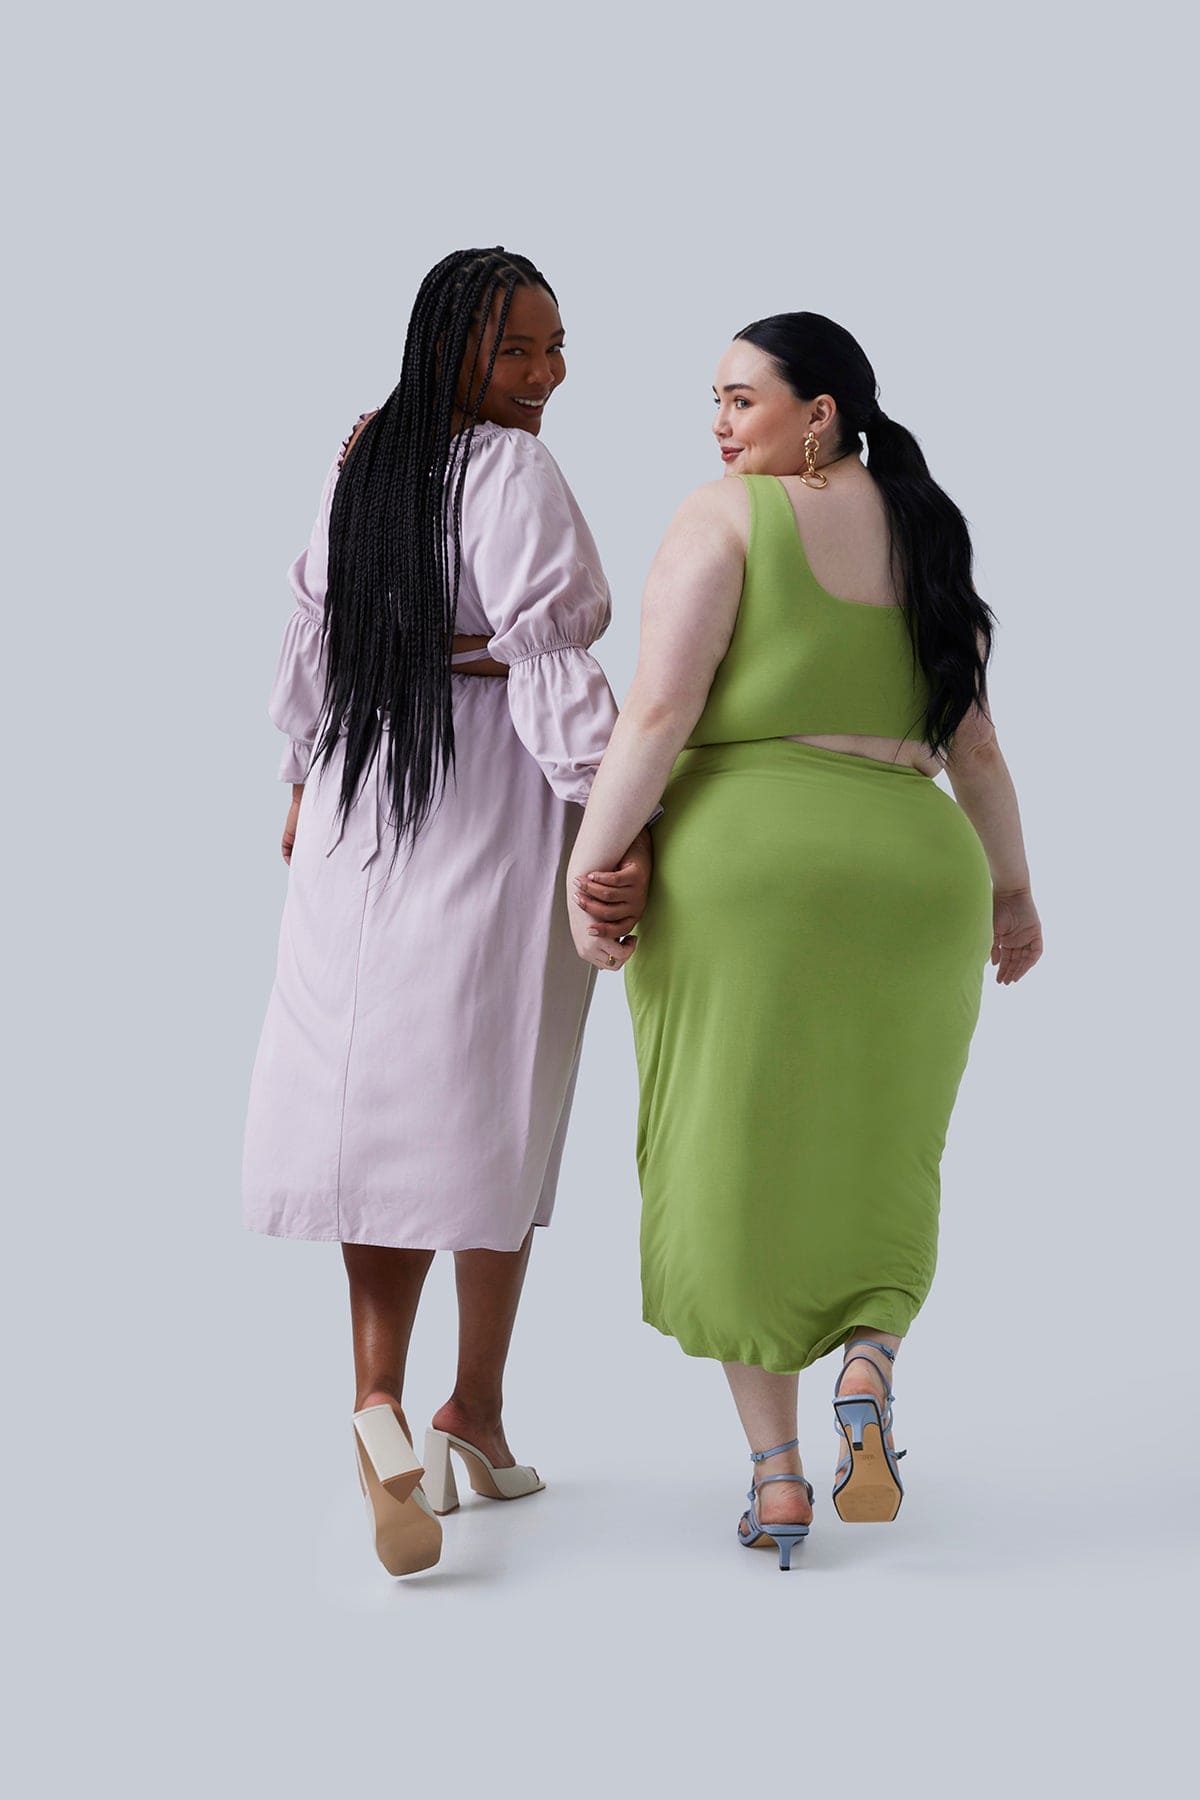 Two plus size models wearing Gia IRL Plus Size Boutique walking and holding hands and looking over their shoulders. Model on left in Gia Top & Gia skirt size 2X, model on the right in Gigi Midi Dress size 2X for Plus Size Women.